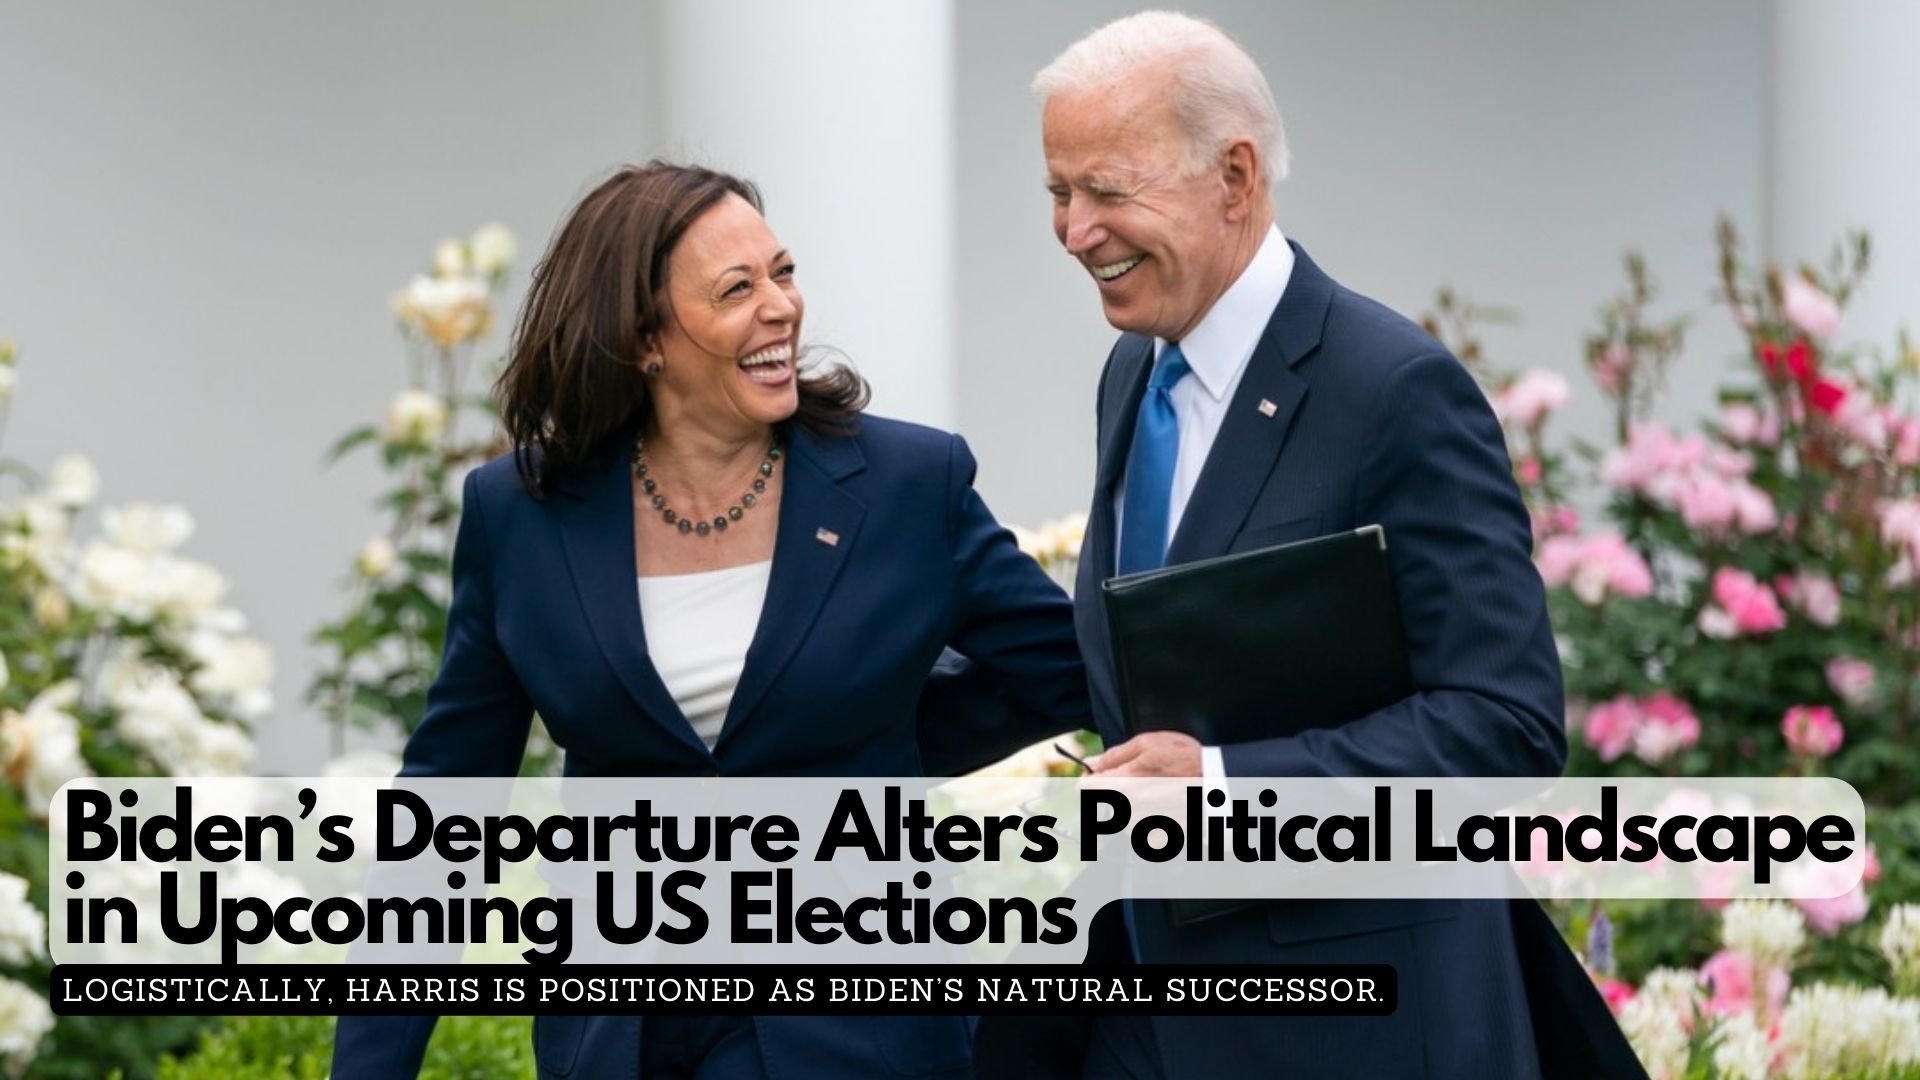 Biden’s Departure Alters Political Landscape in Upcoming US Elections